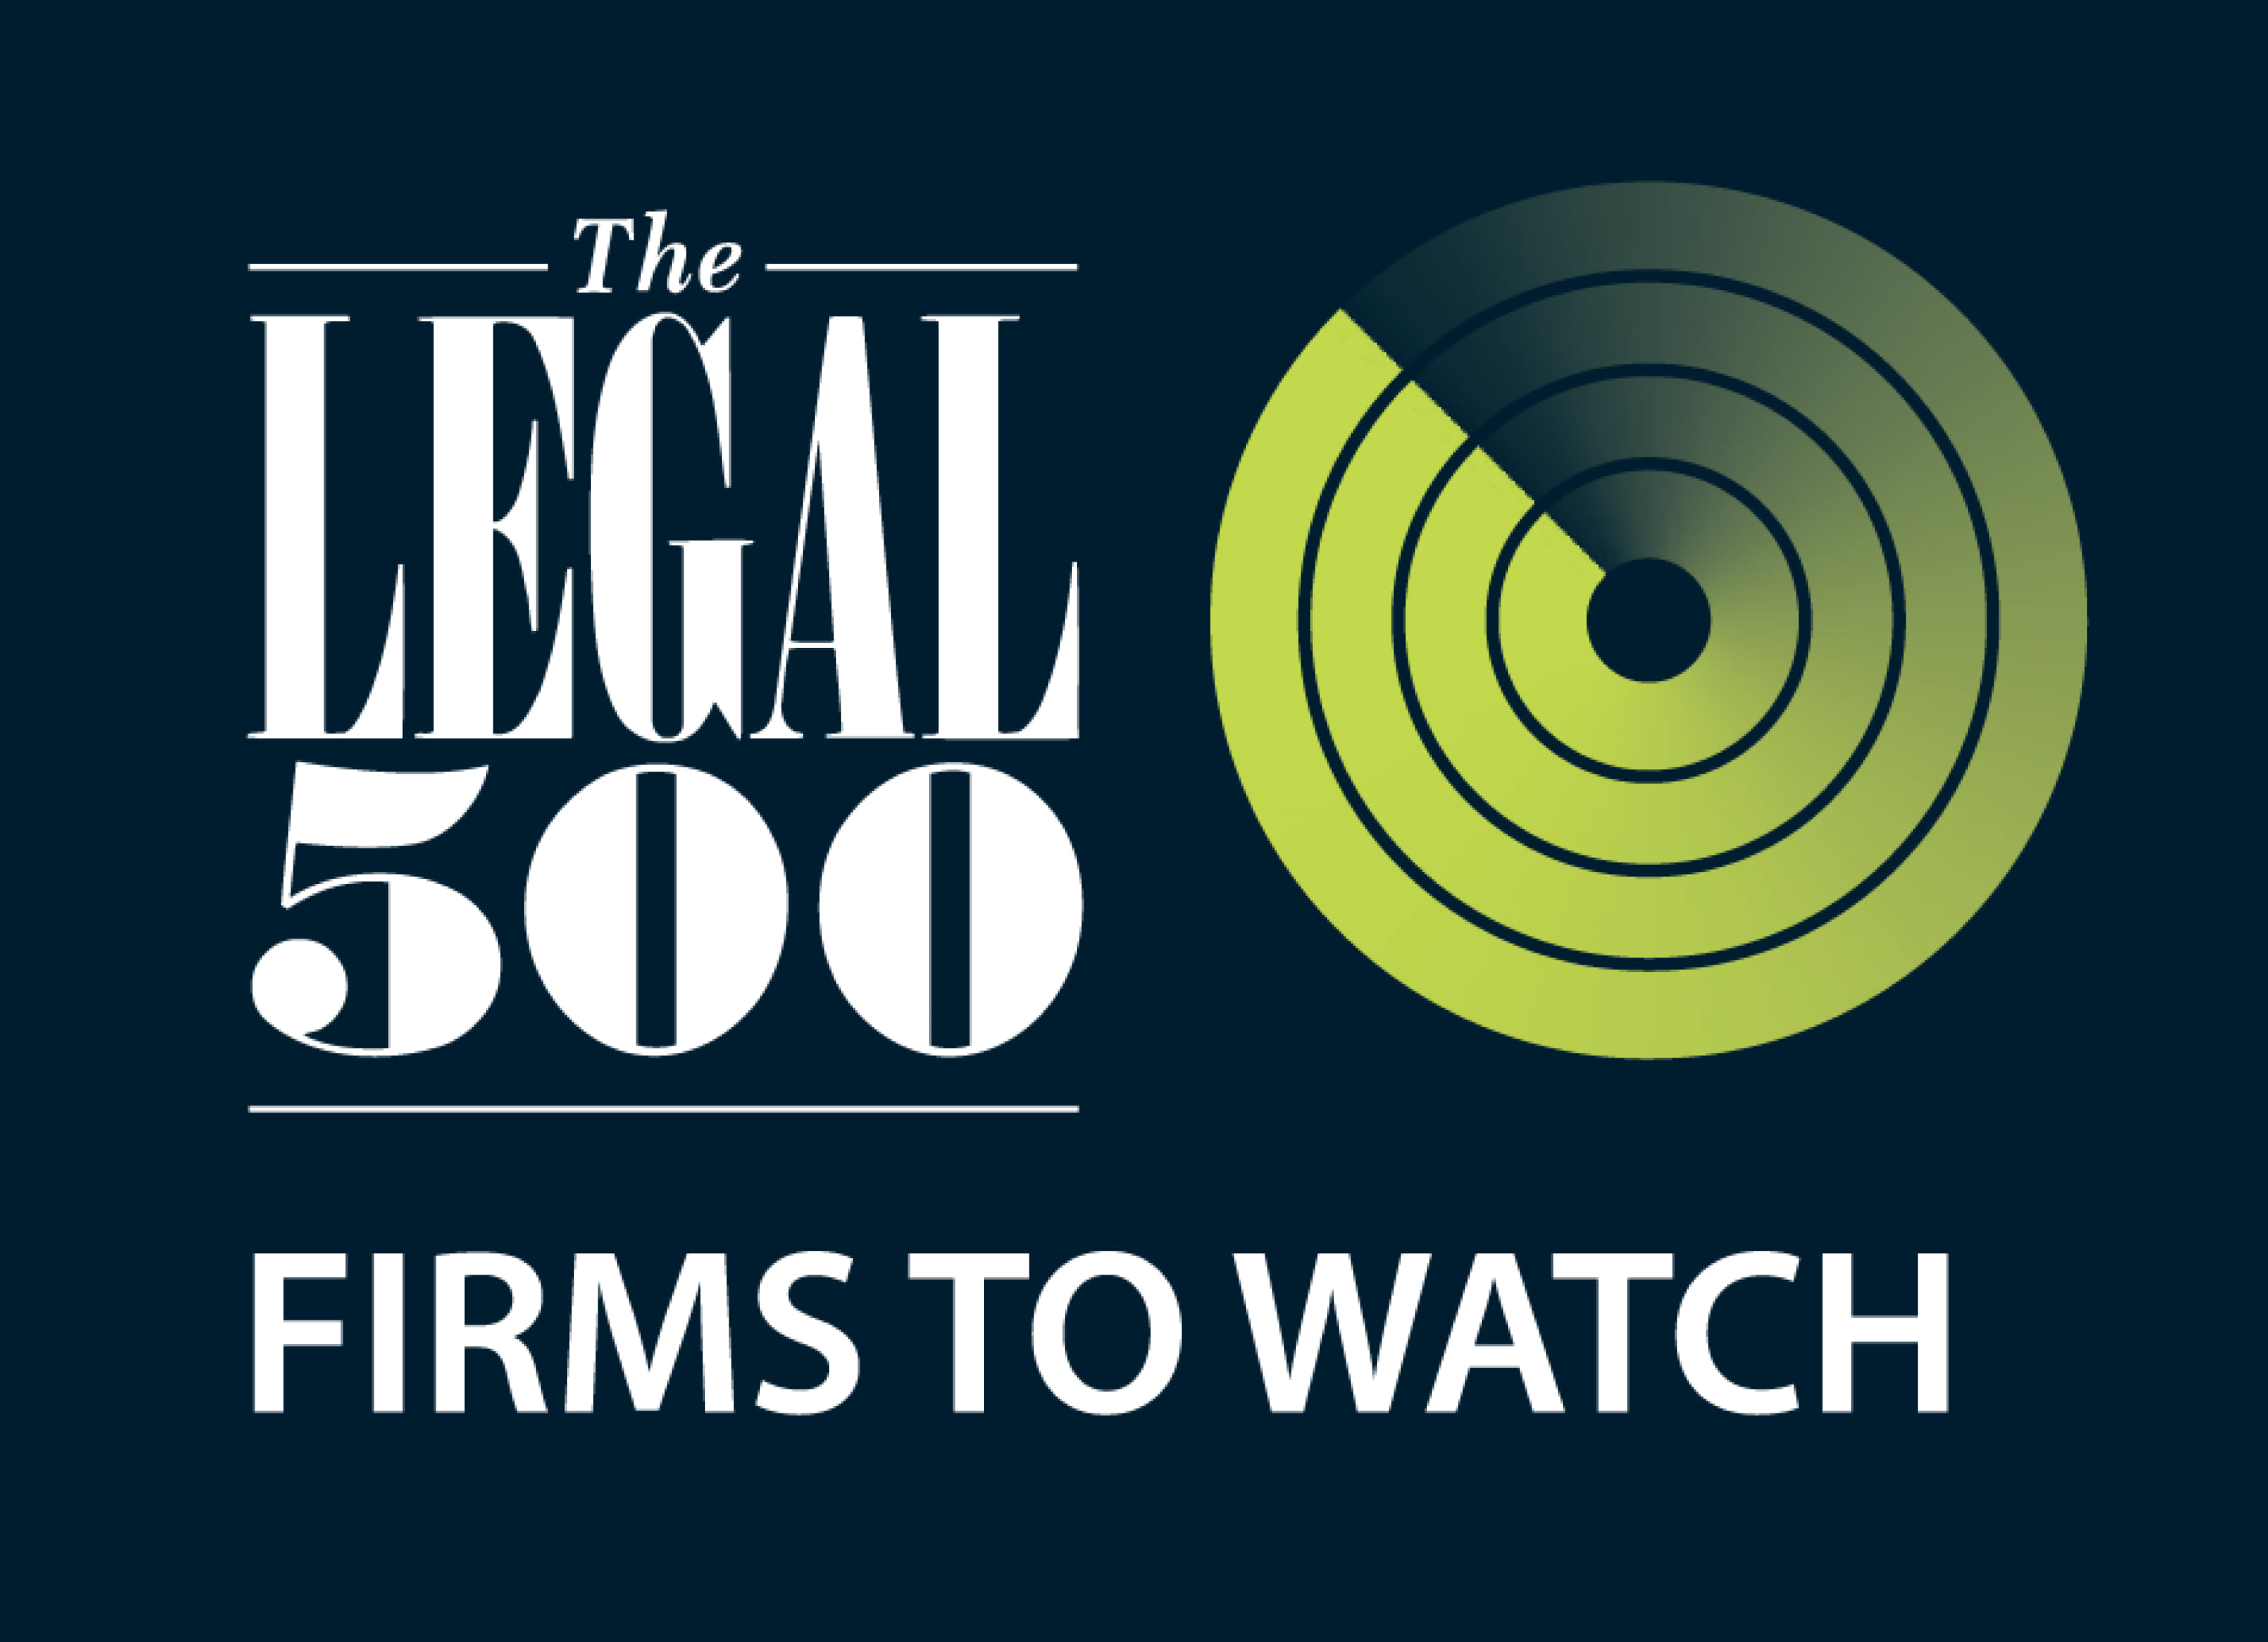 LC Lawyers LLP is recognised as “Firm to Watch” in Corporate (including M&A) by Legal 500 Asia Pacific, 2022